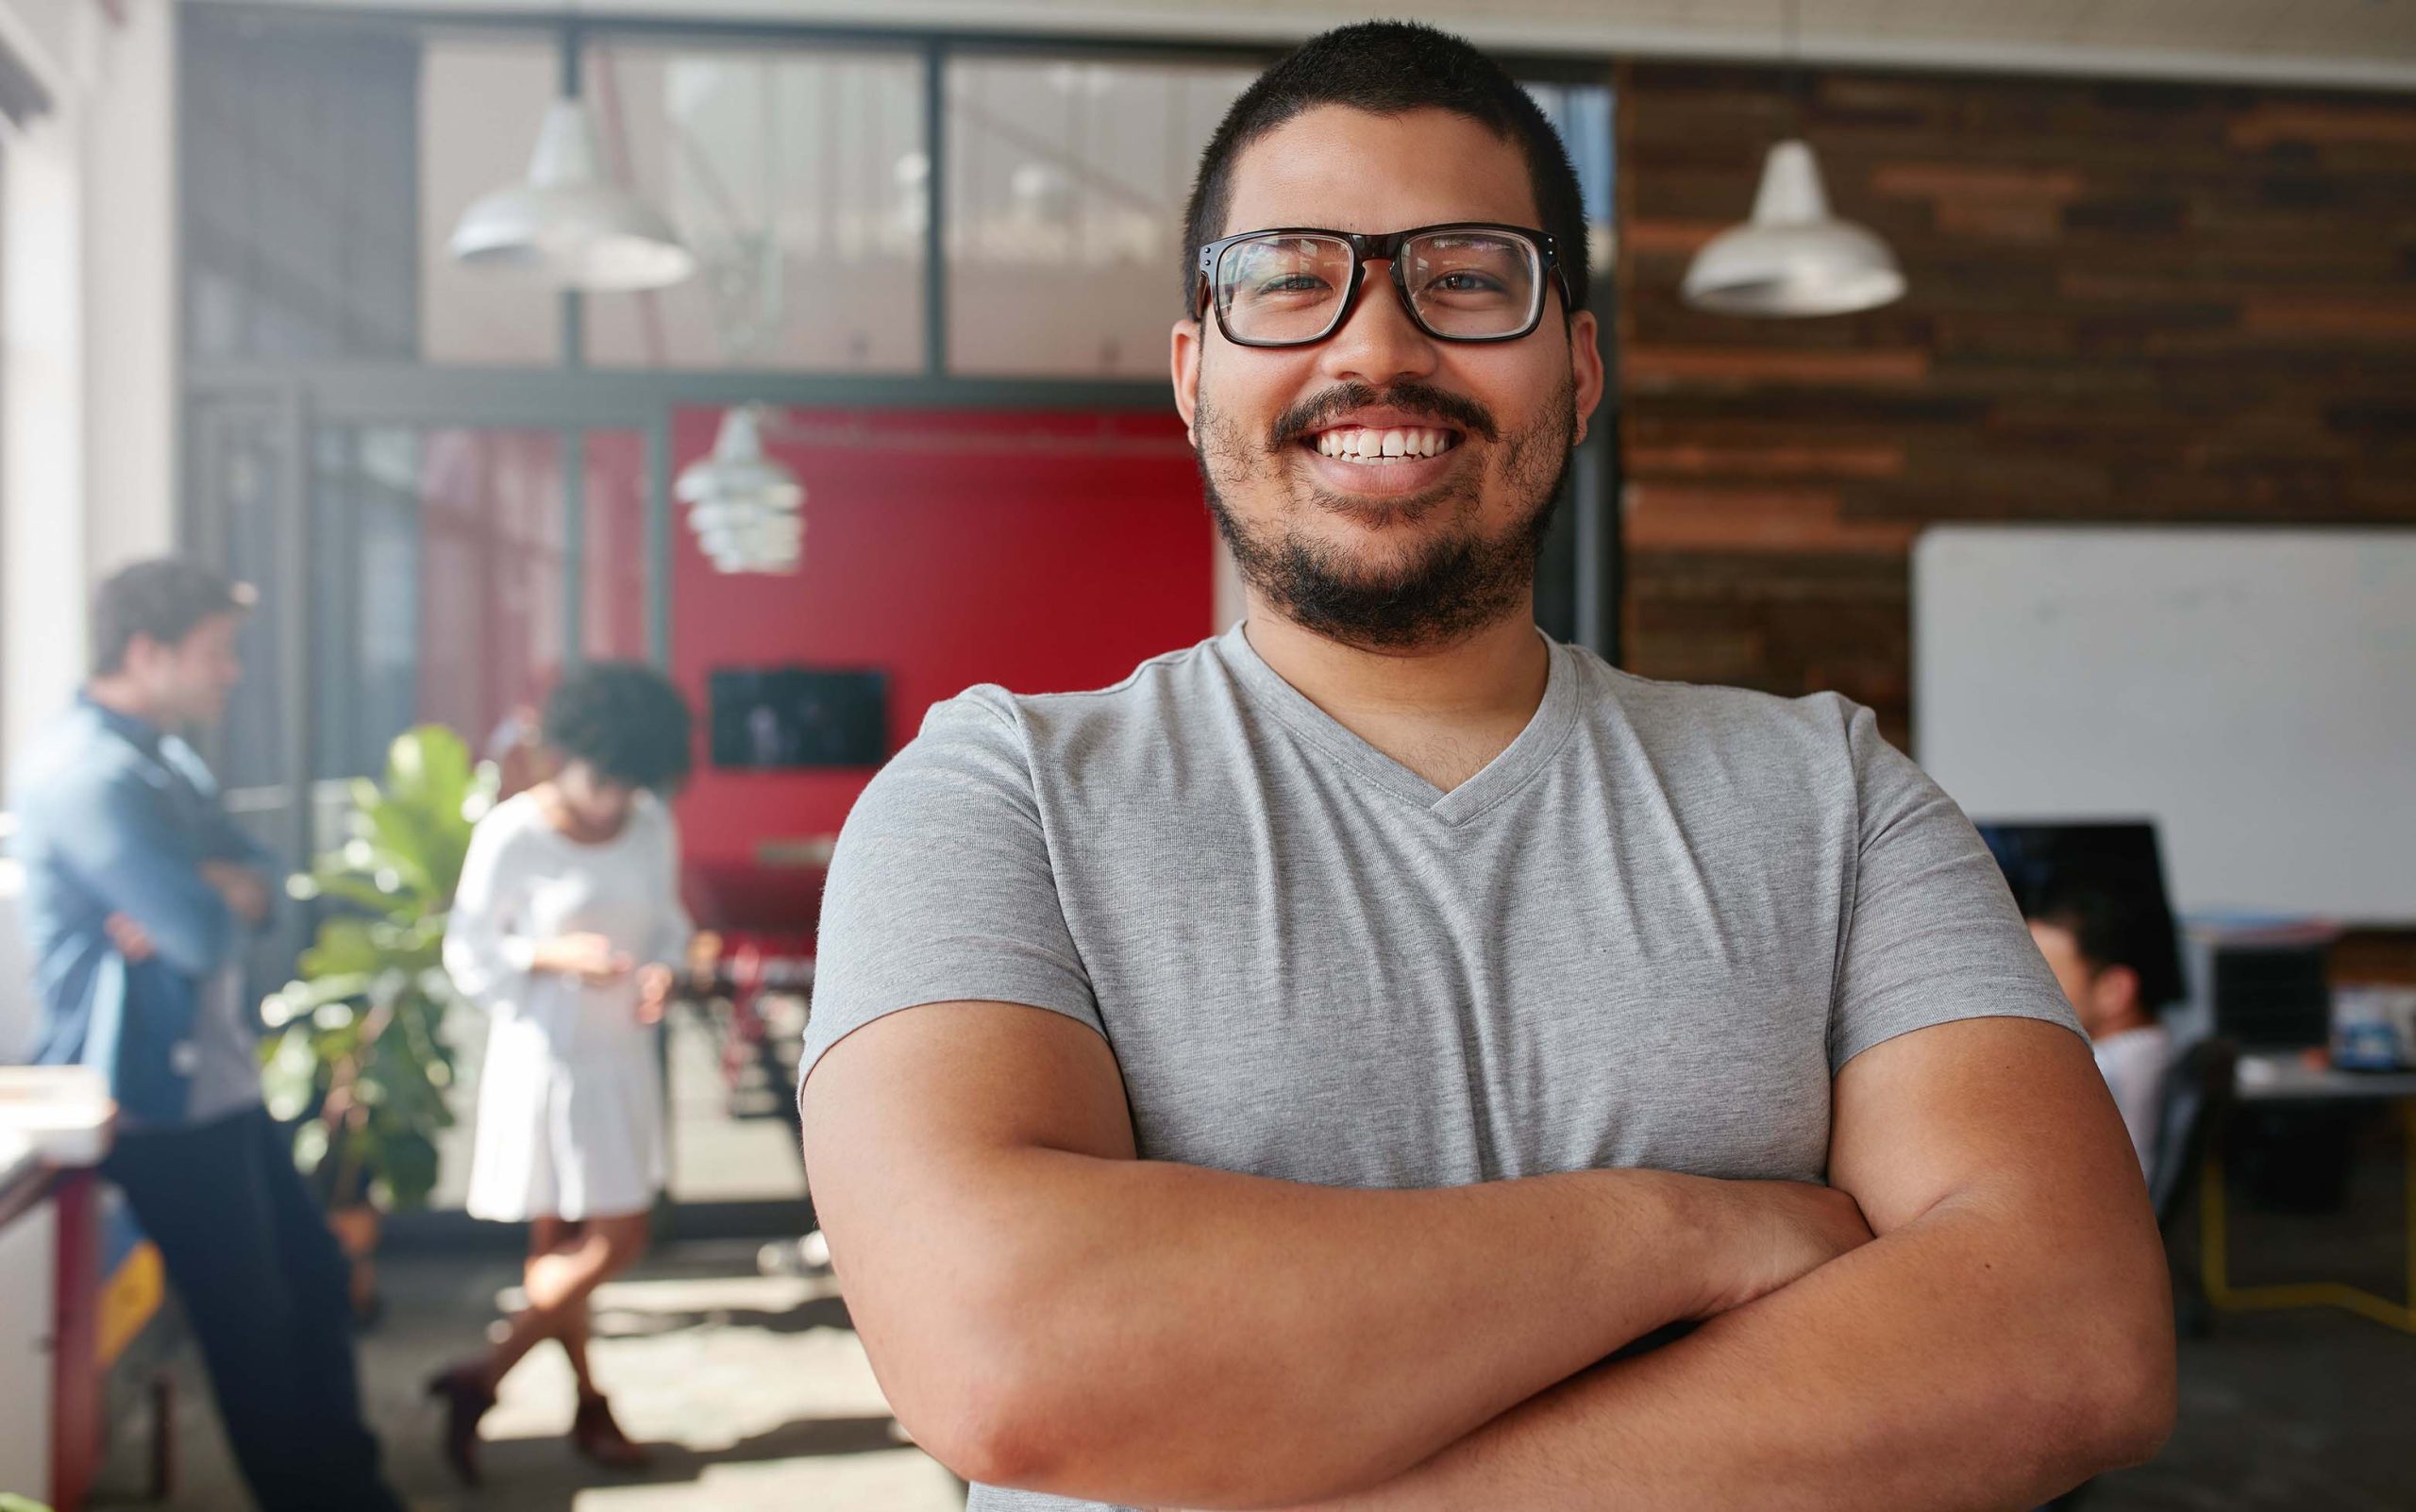 Portrait of a confident creative professional with colleagues in the background. Mixed race man standing with his arms crossed looking at camera and smiling.